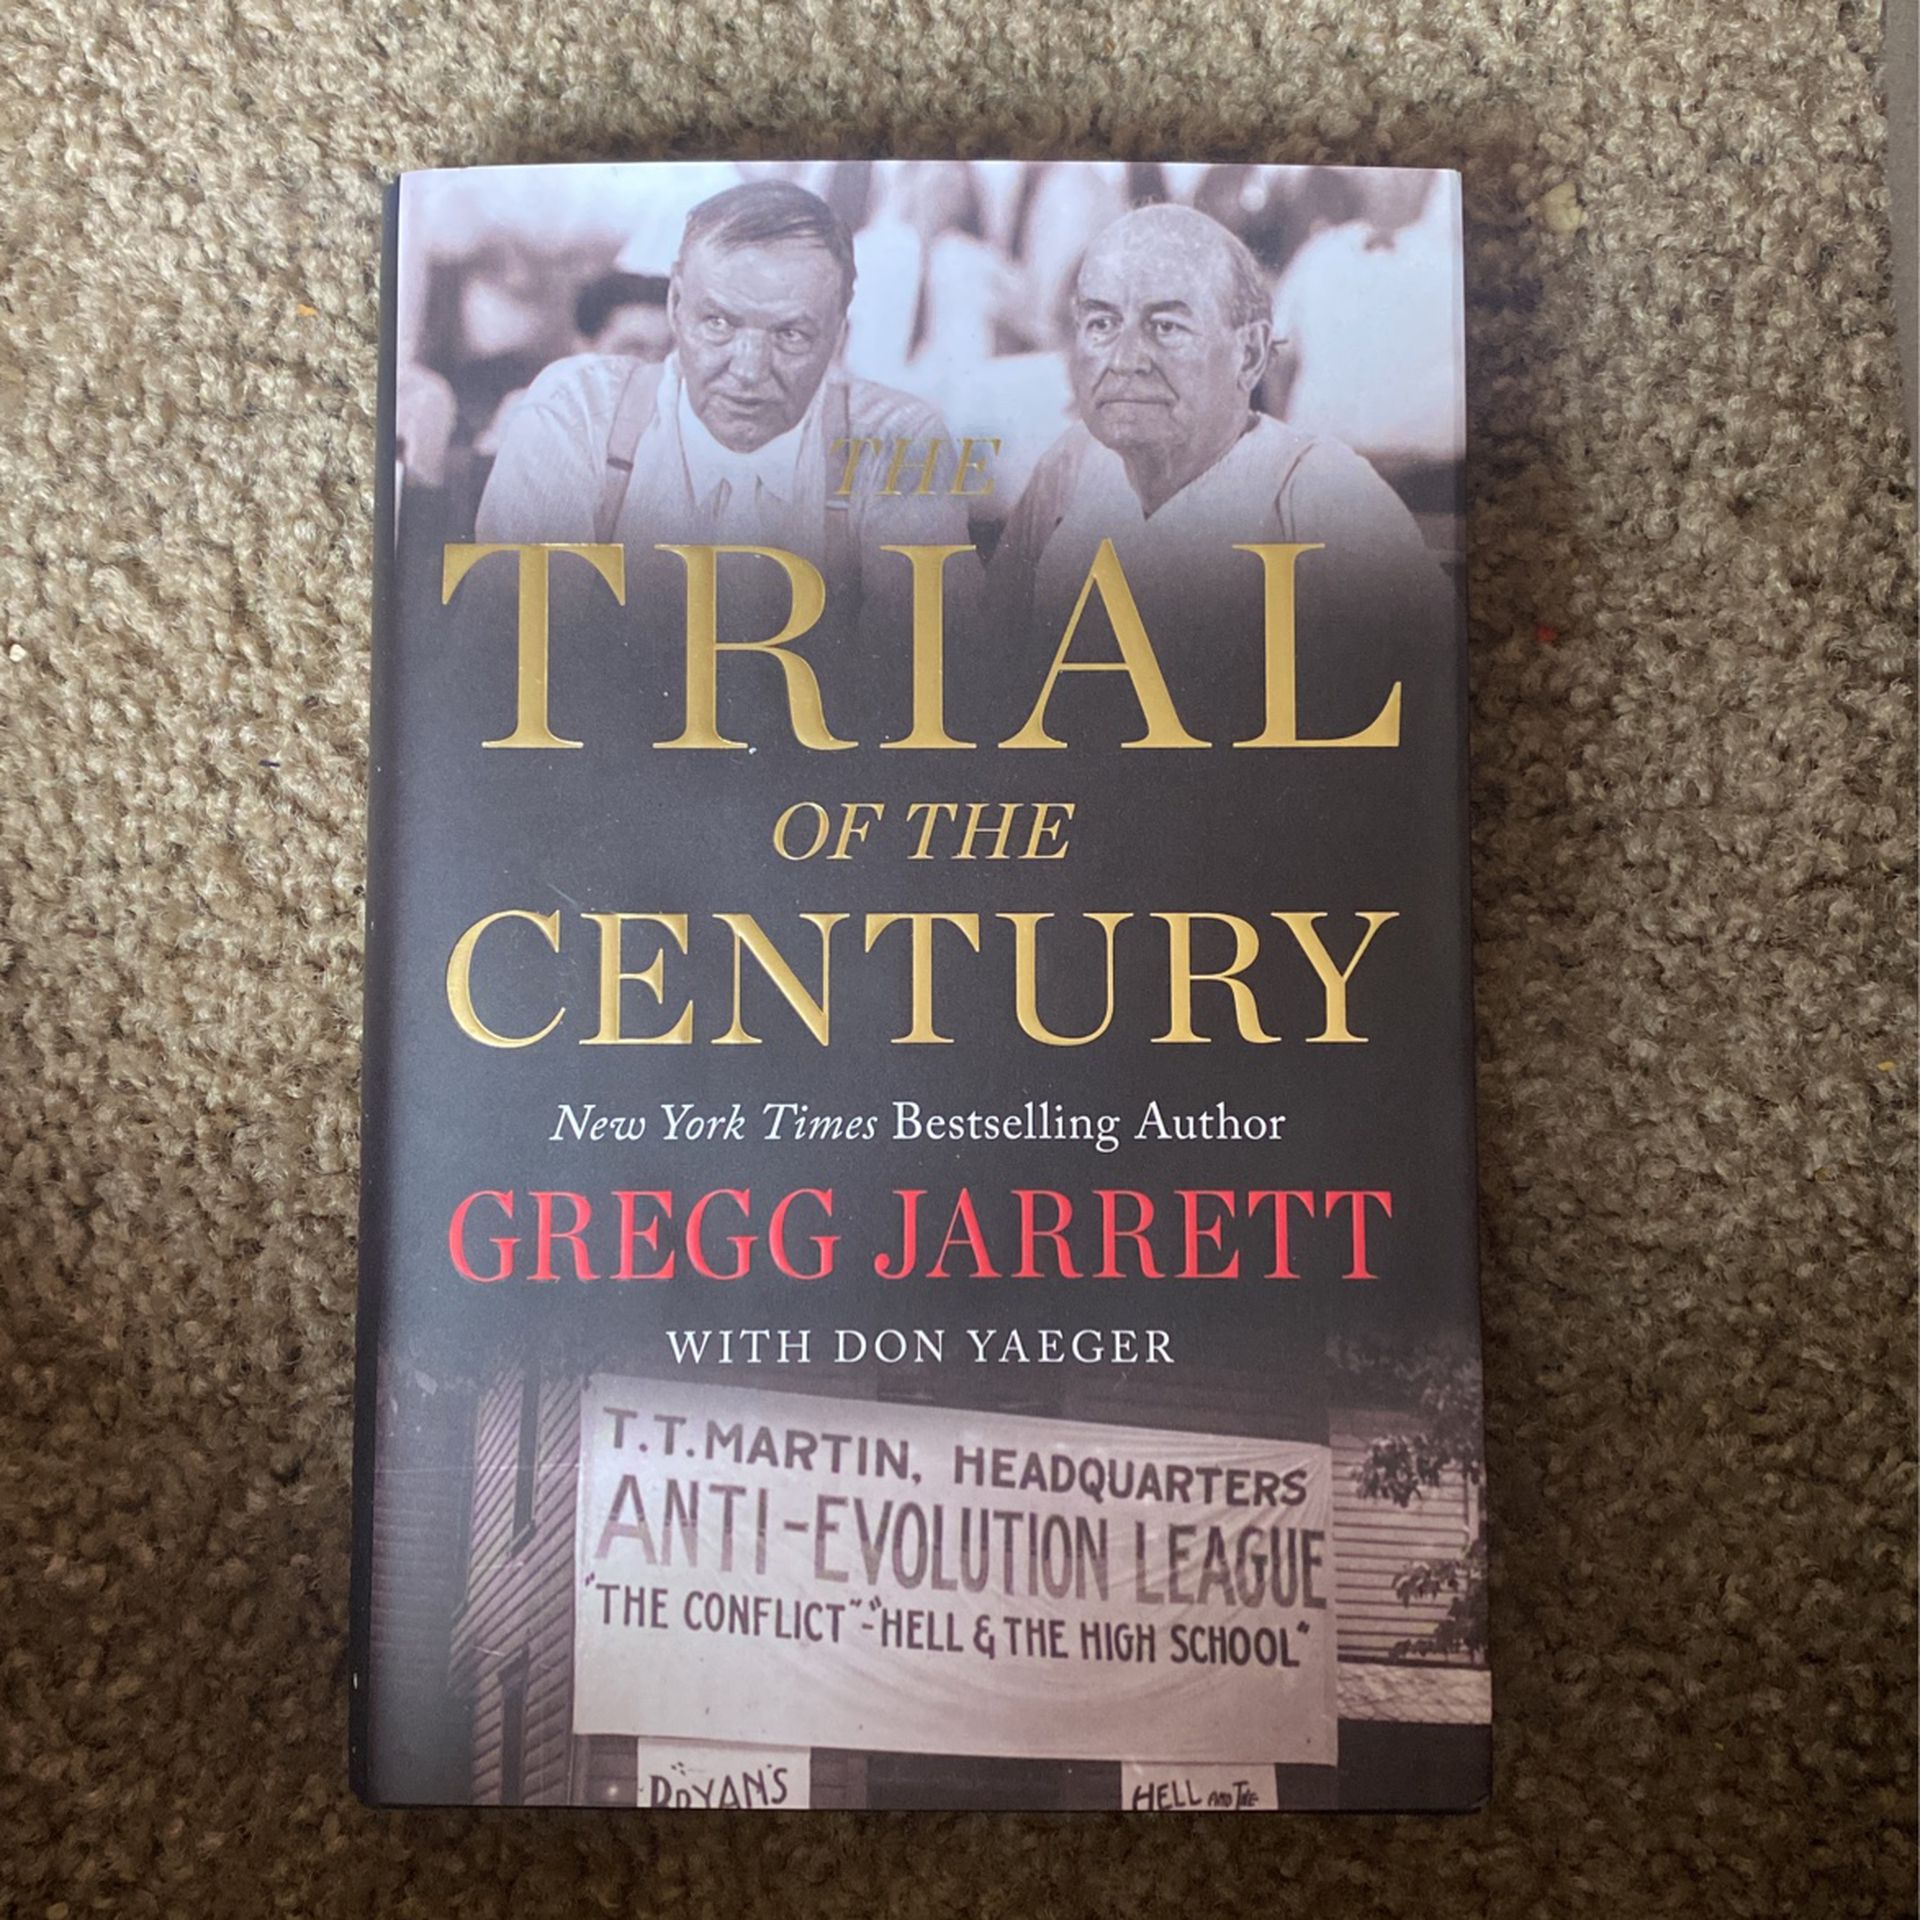 Trial Of The Century By: Gregg Jarret With Don Yaeger (hardcover)